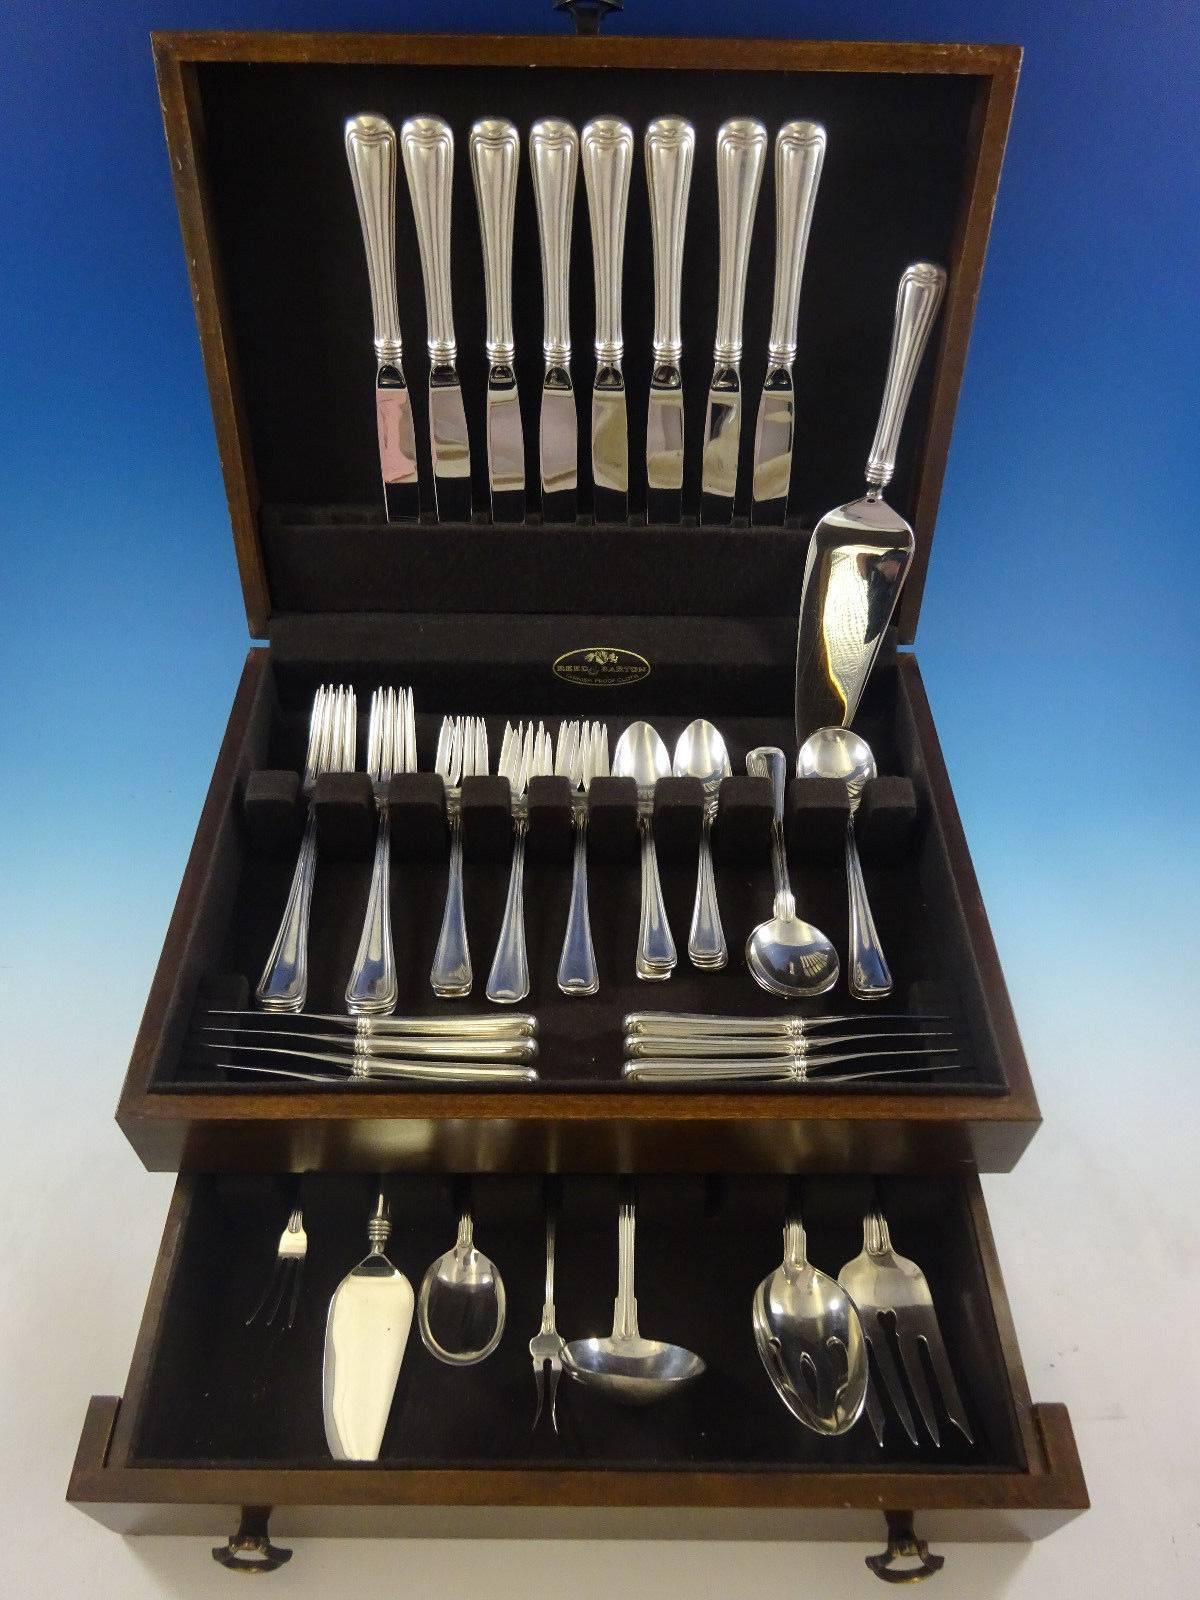 Dinner size Old French by Gorham sterling silver flatware set of 49 pieces. This set includes: Eight dinner size knives, 9 3/4